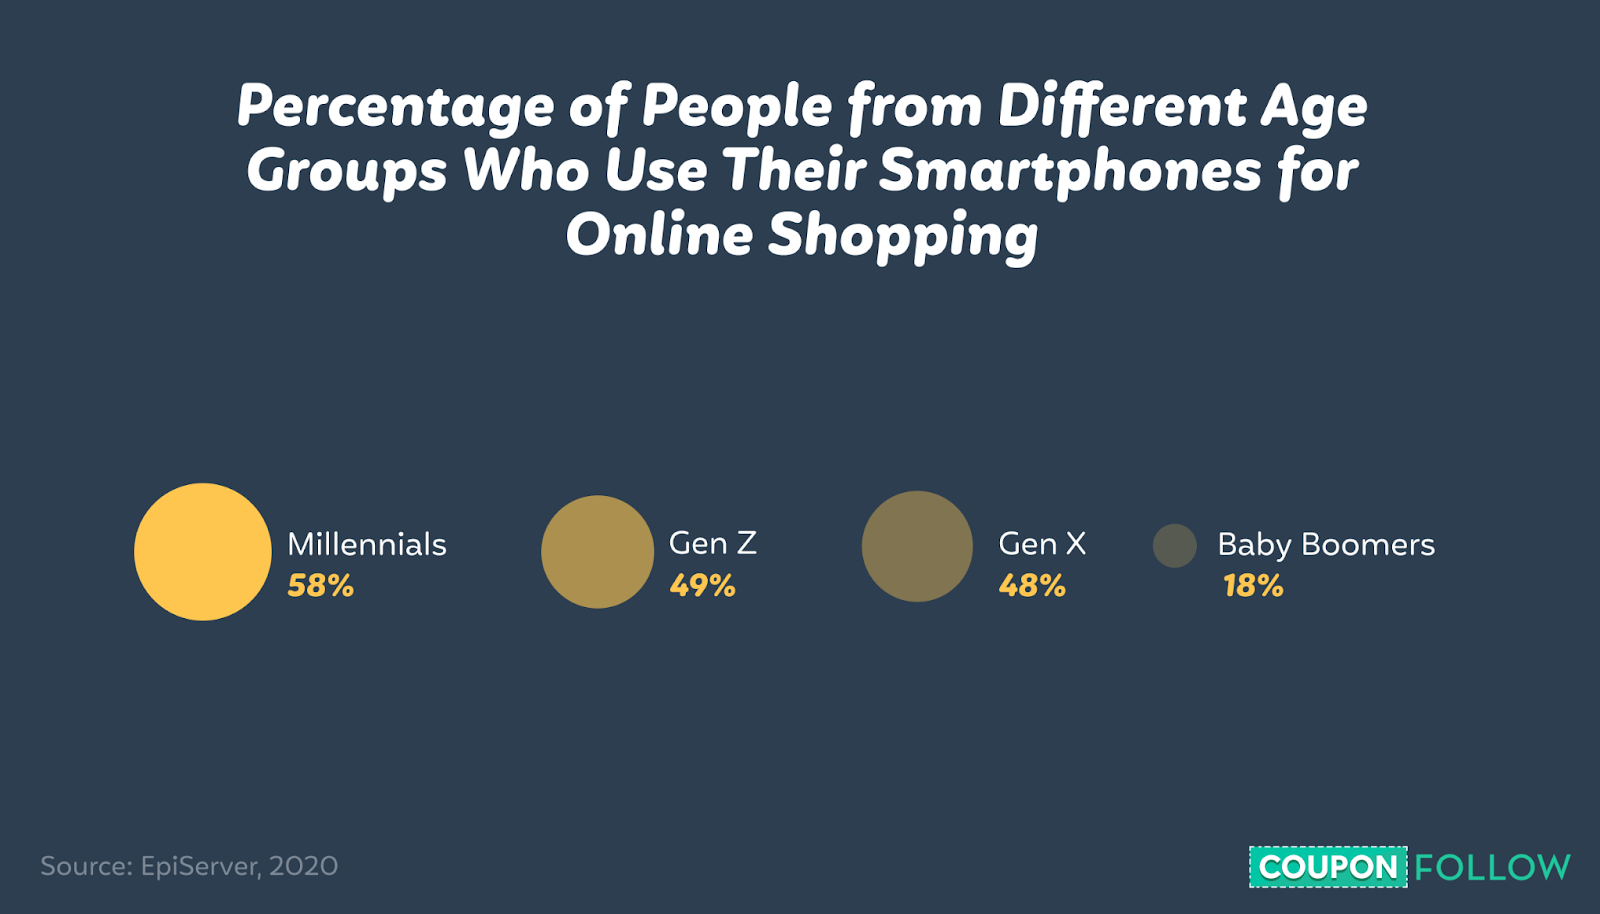 Graph showing the number of people from different age groups who use their smartphones to shop online